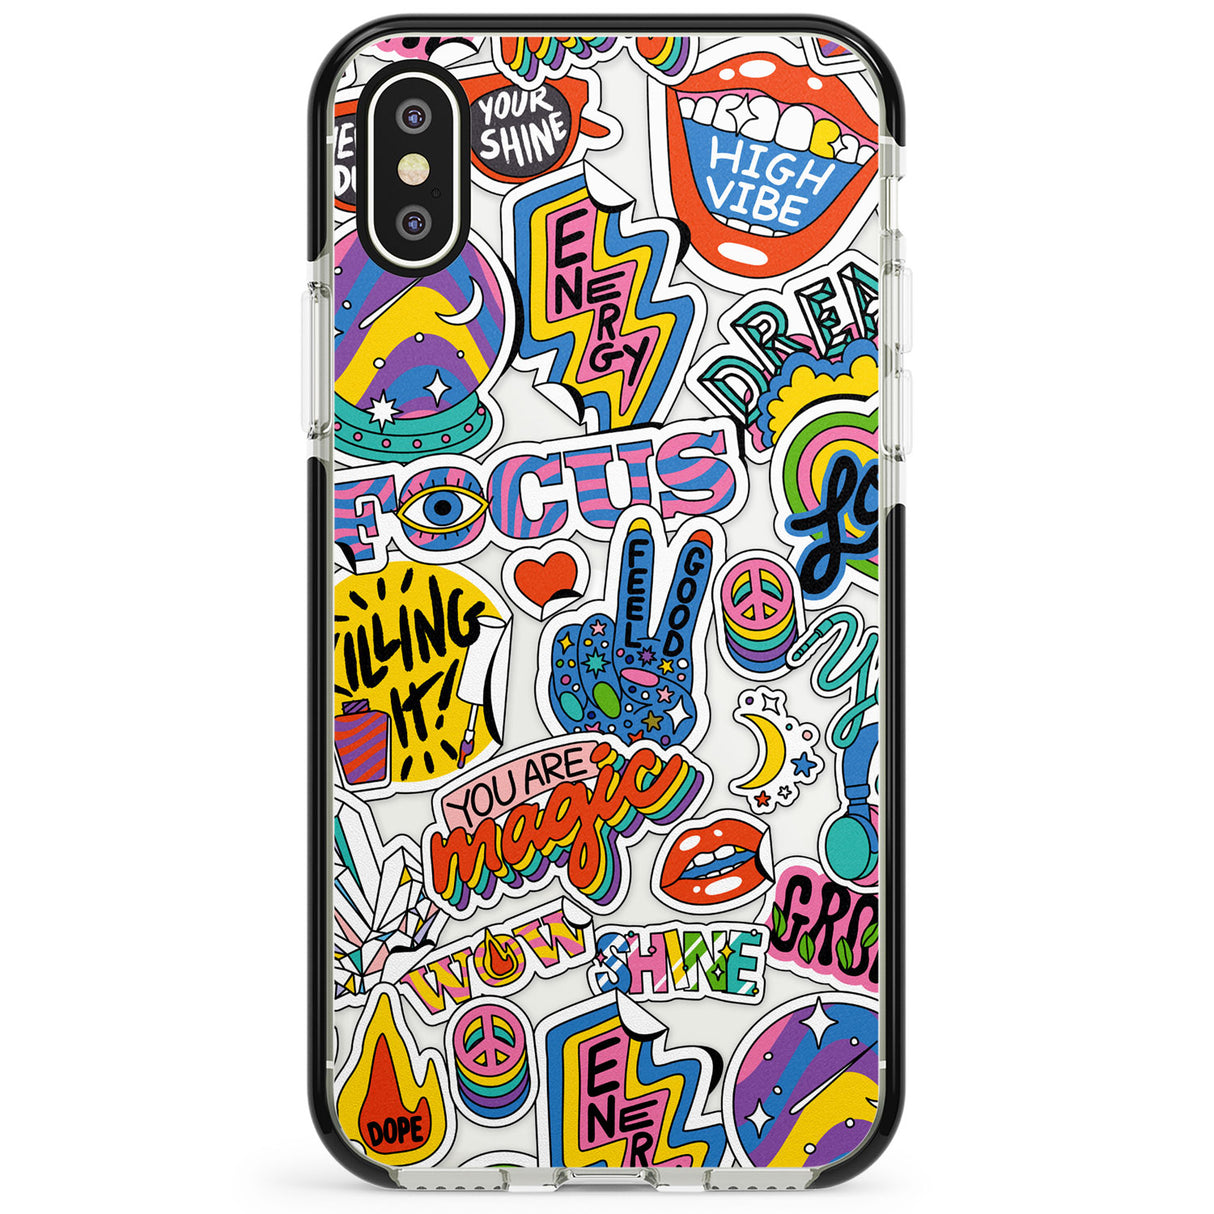 Magic Sticker Collage Phone Case for iPhone X XS Max XR